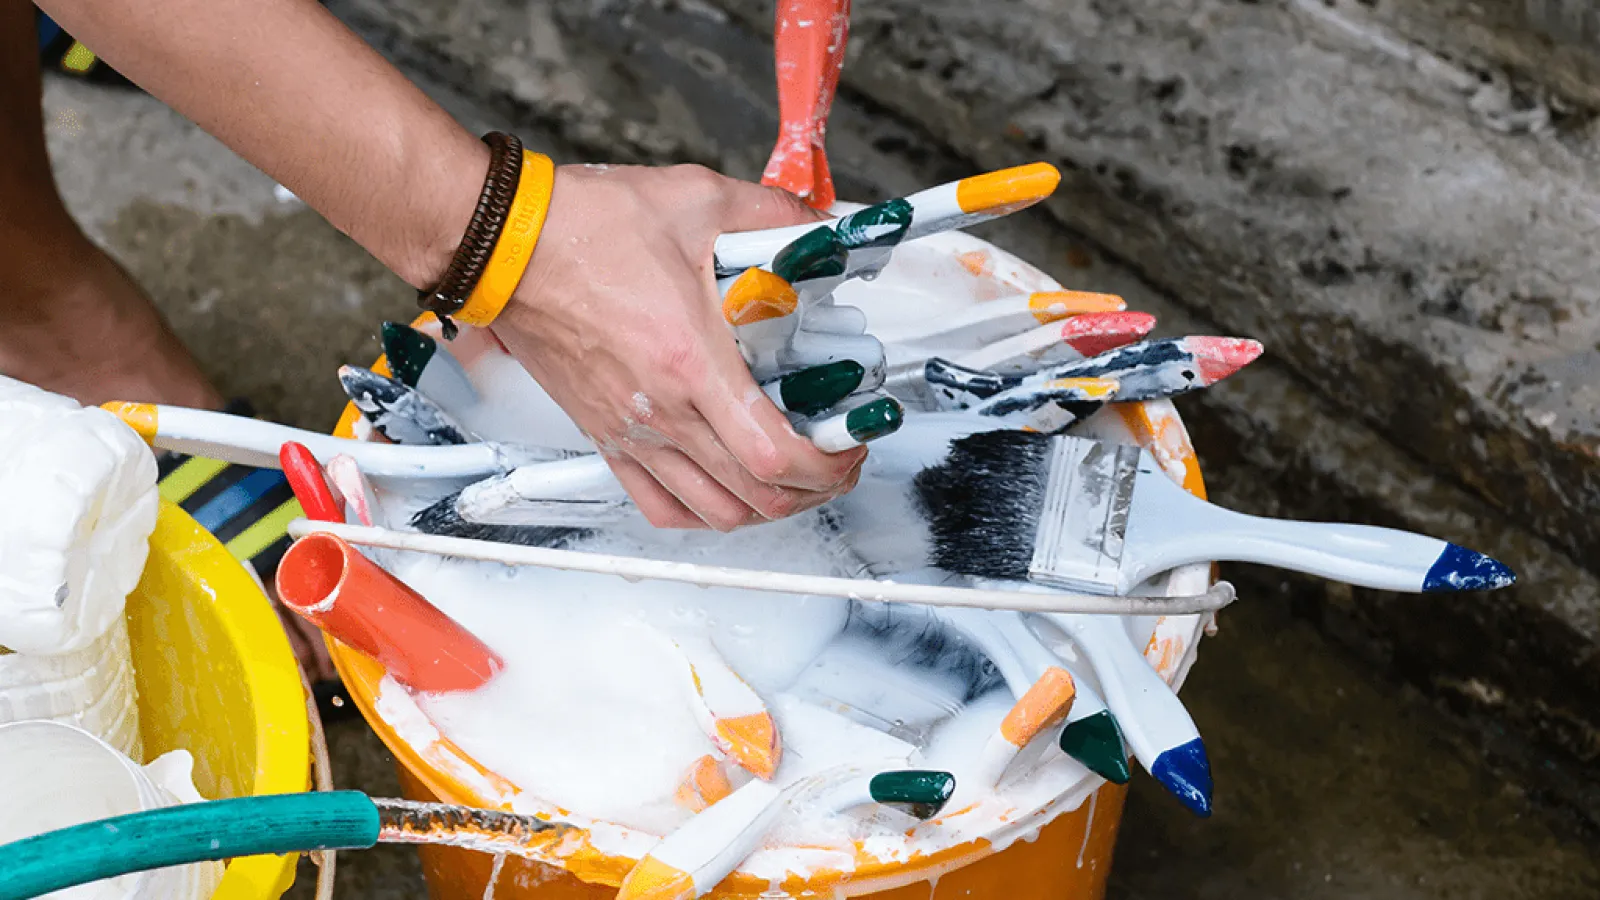 Painting Project This Winter?  Don’t rinse the Brush in the Sink